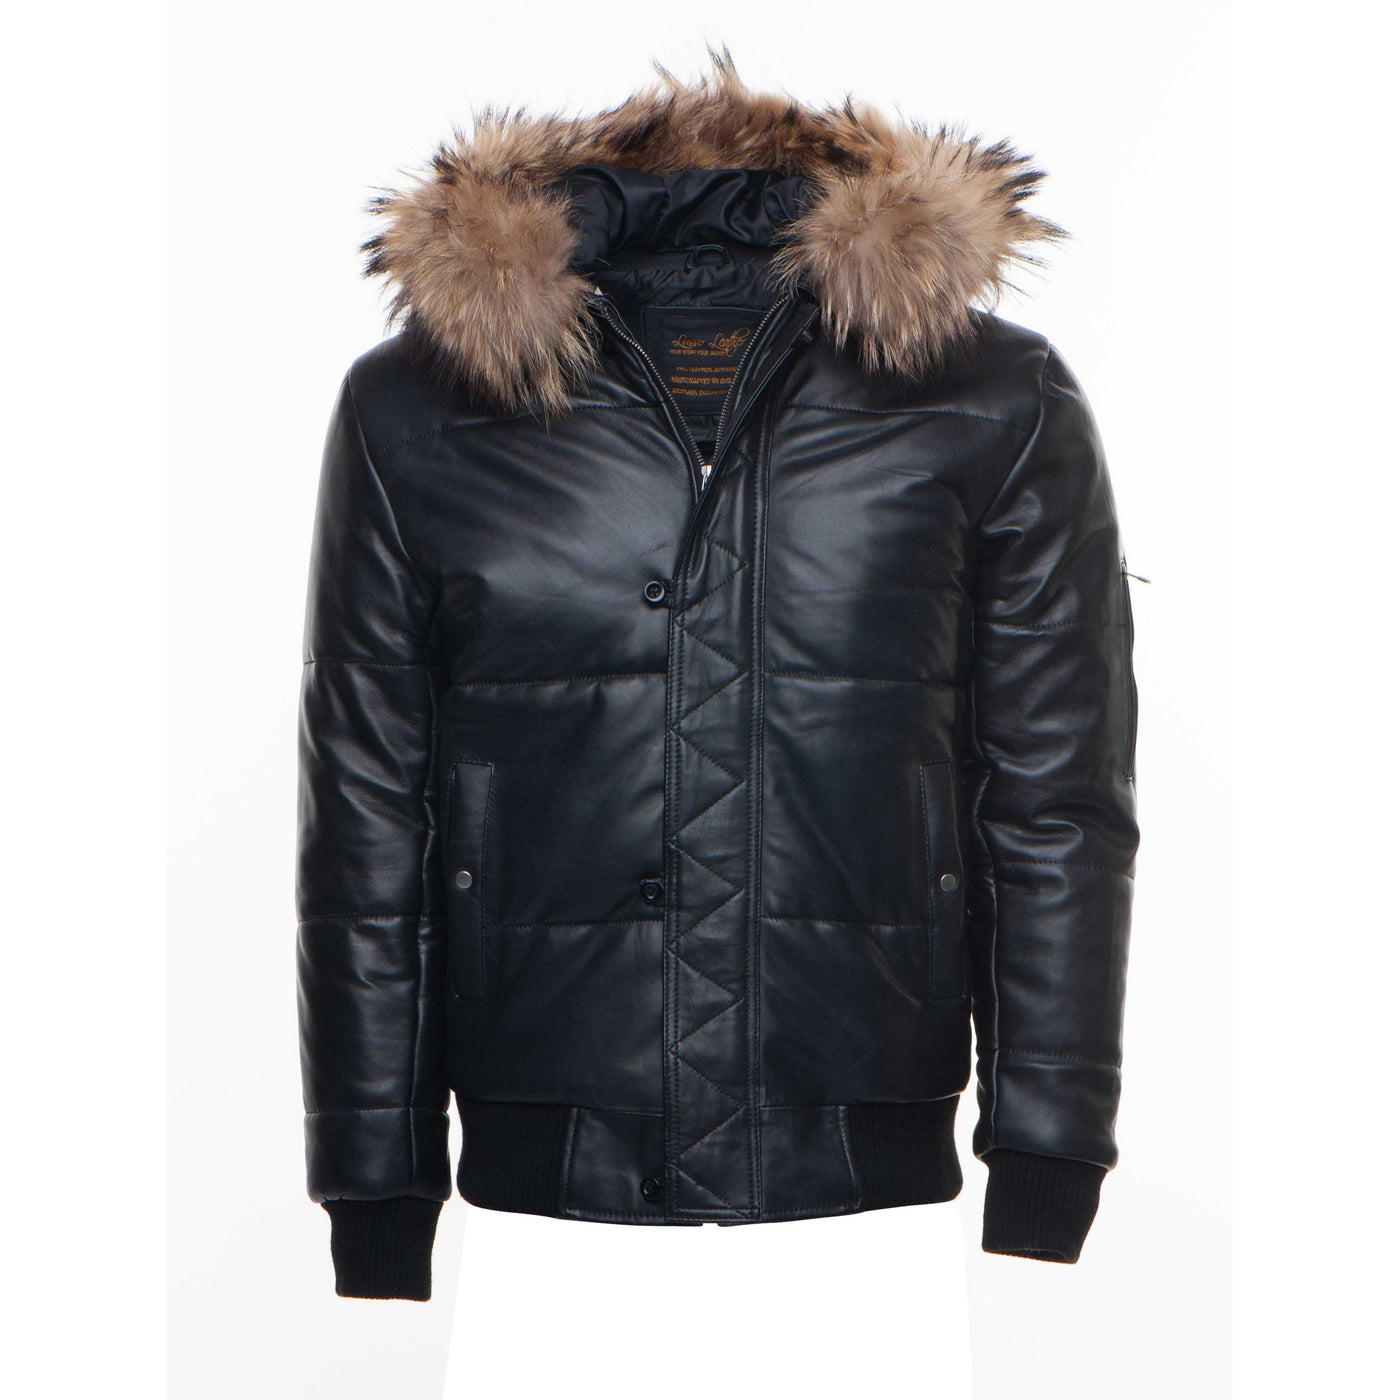 Traynor's Puffer Winter Jacket with Ribbed Cuffs and Waist and Fur Trim